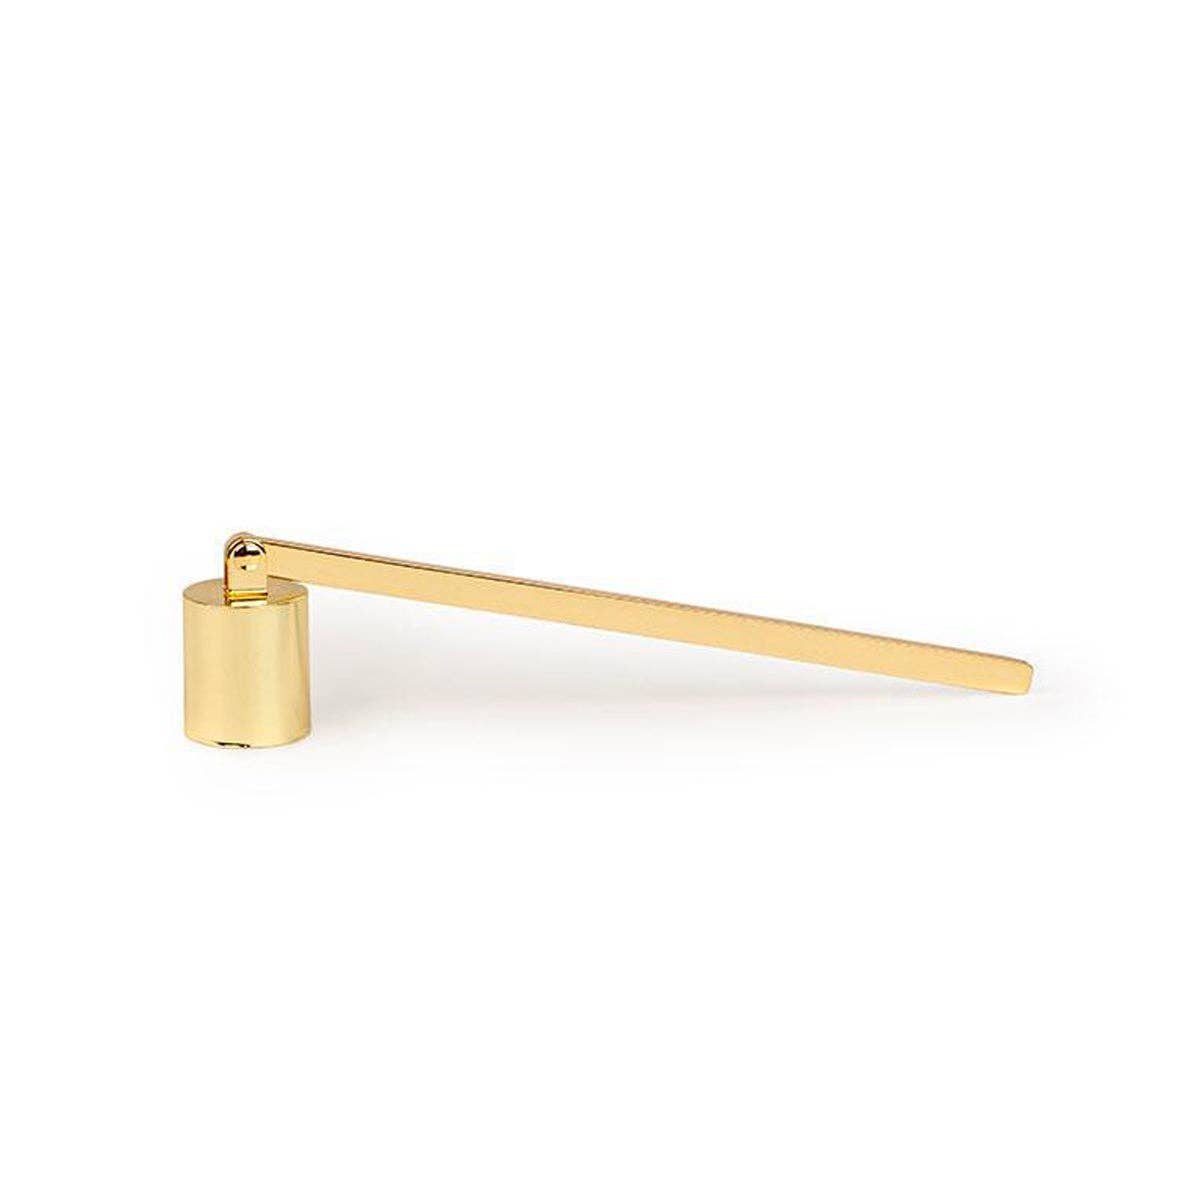 Chandler Studio - Gold Candle Snuffer